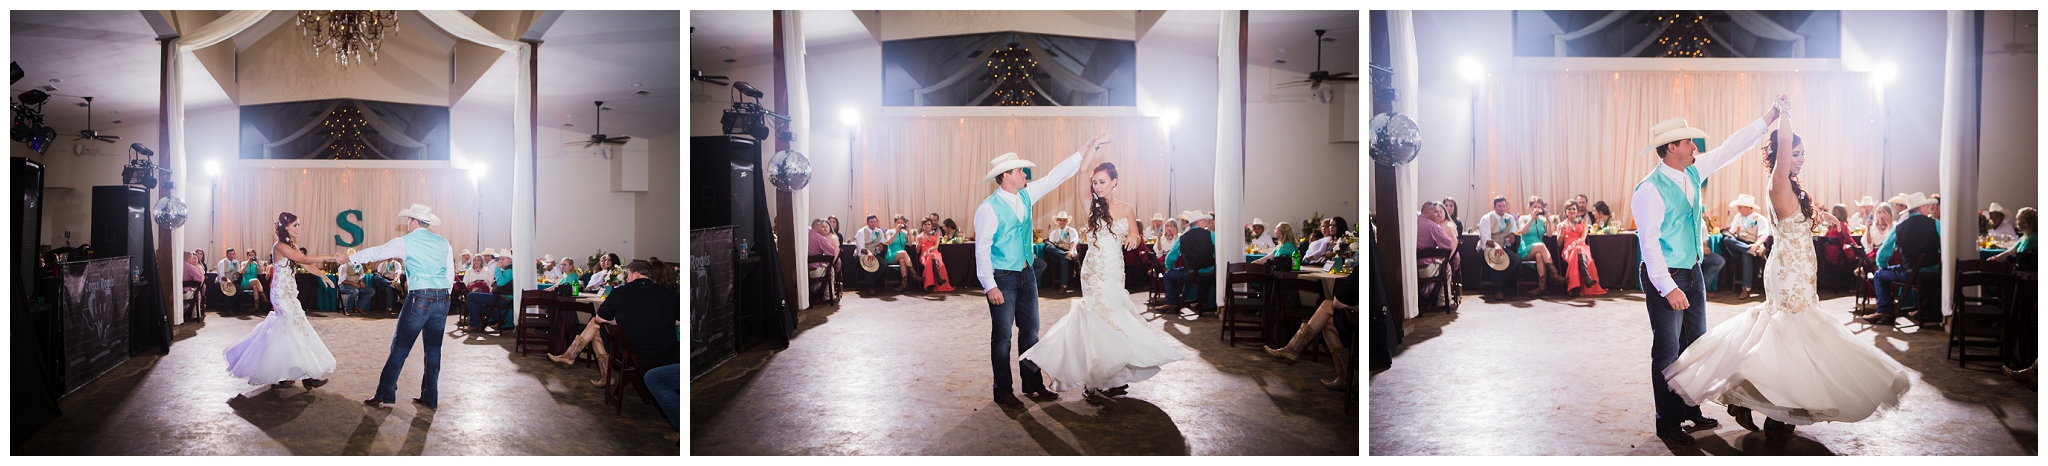 Boerne Wedding Photographer CW Hill Country Ranch Wedding Venue turquoise bronze brown wedding colors Fall Wedding 0098